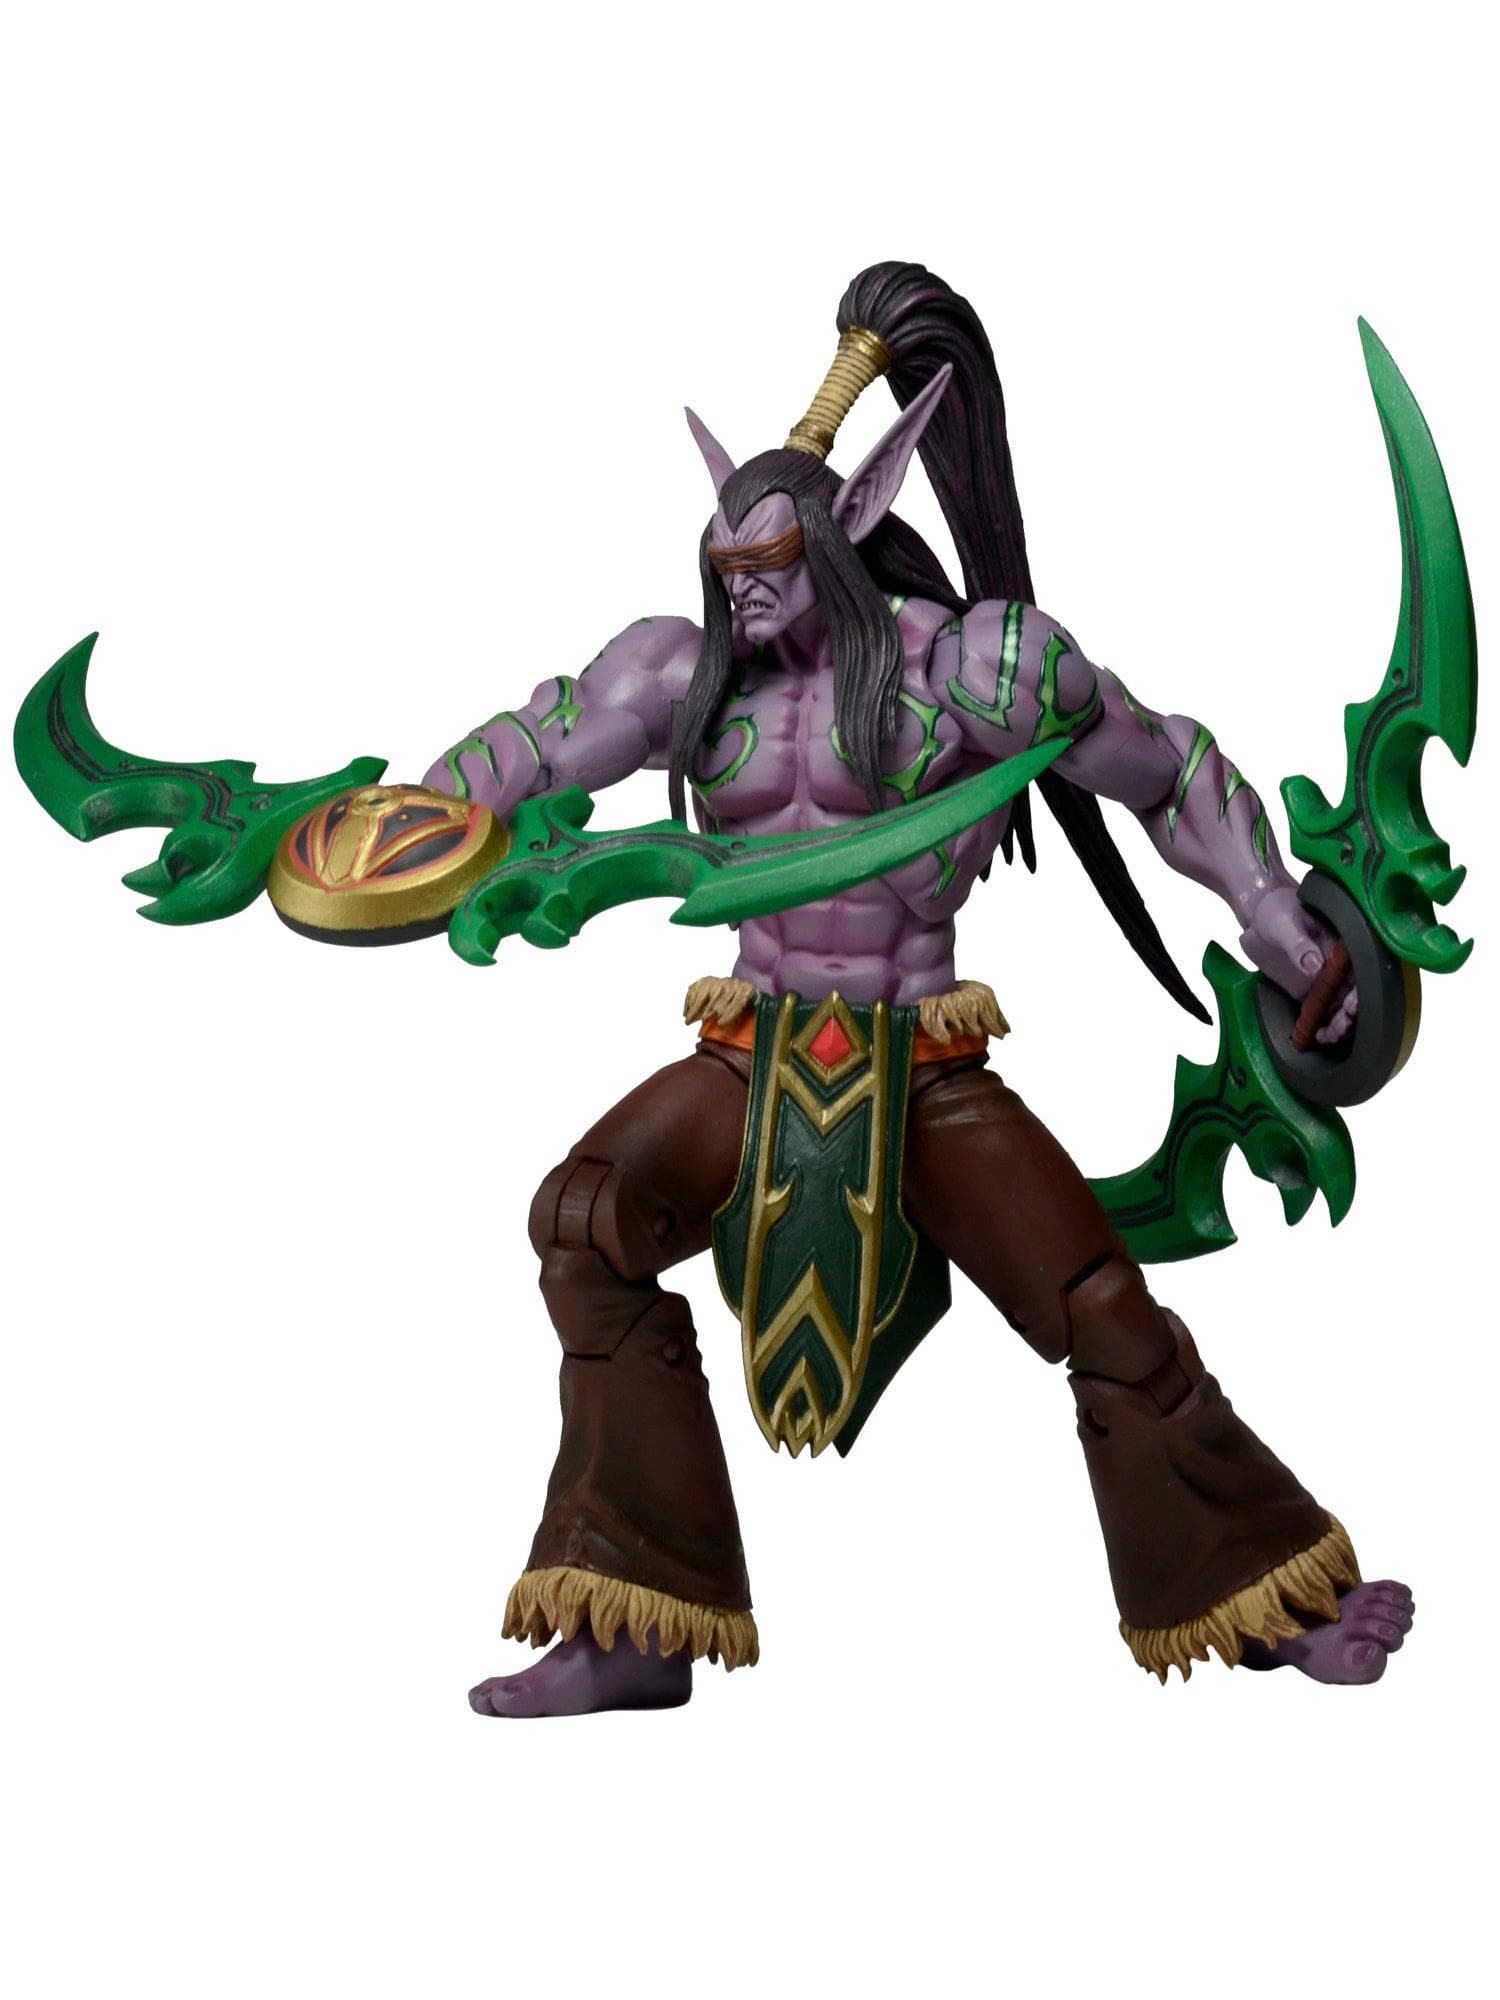 NECA - Heroes of the Storm - 7" Scale Action Figure - Series 1 Illidan - costumes.com